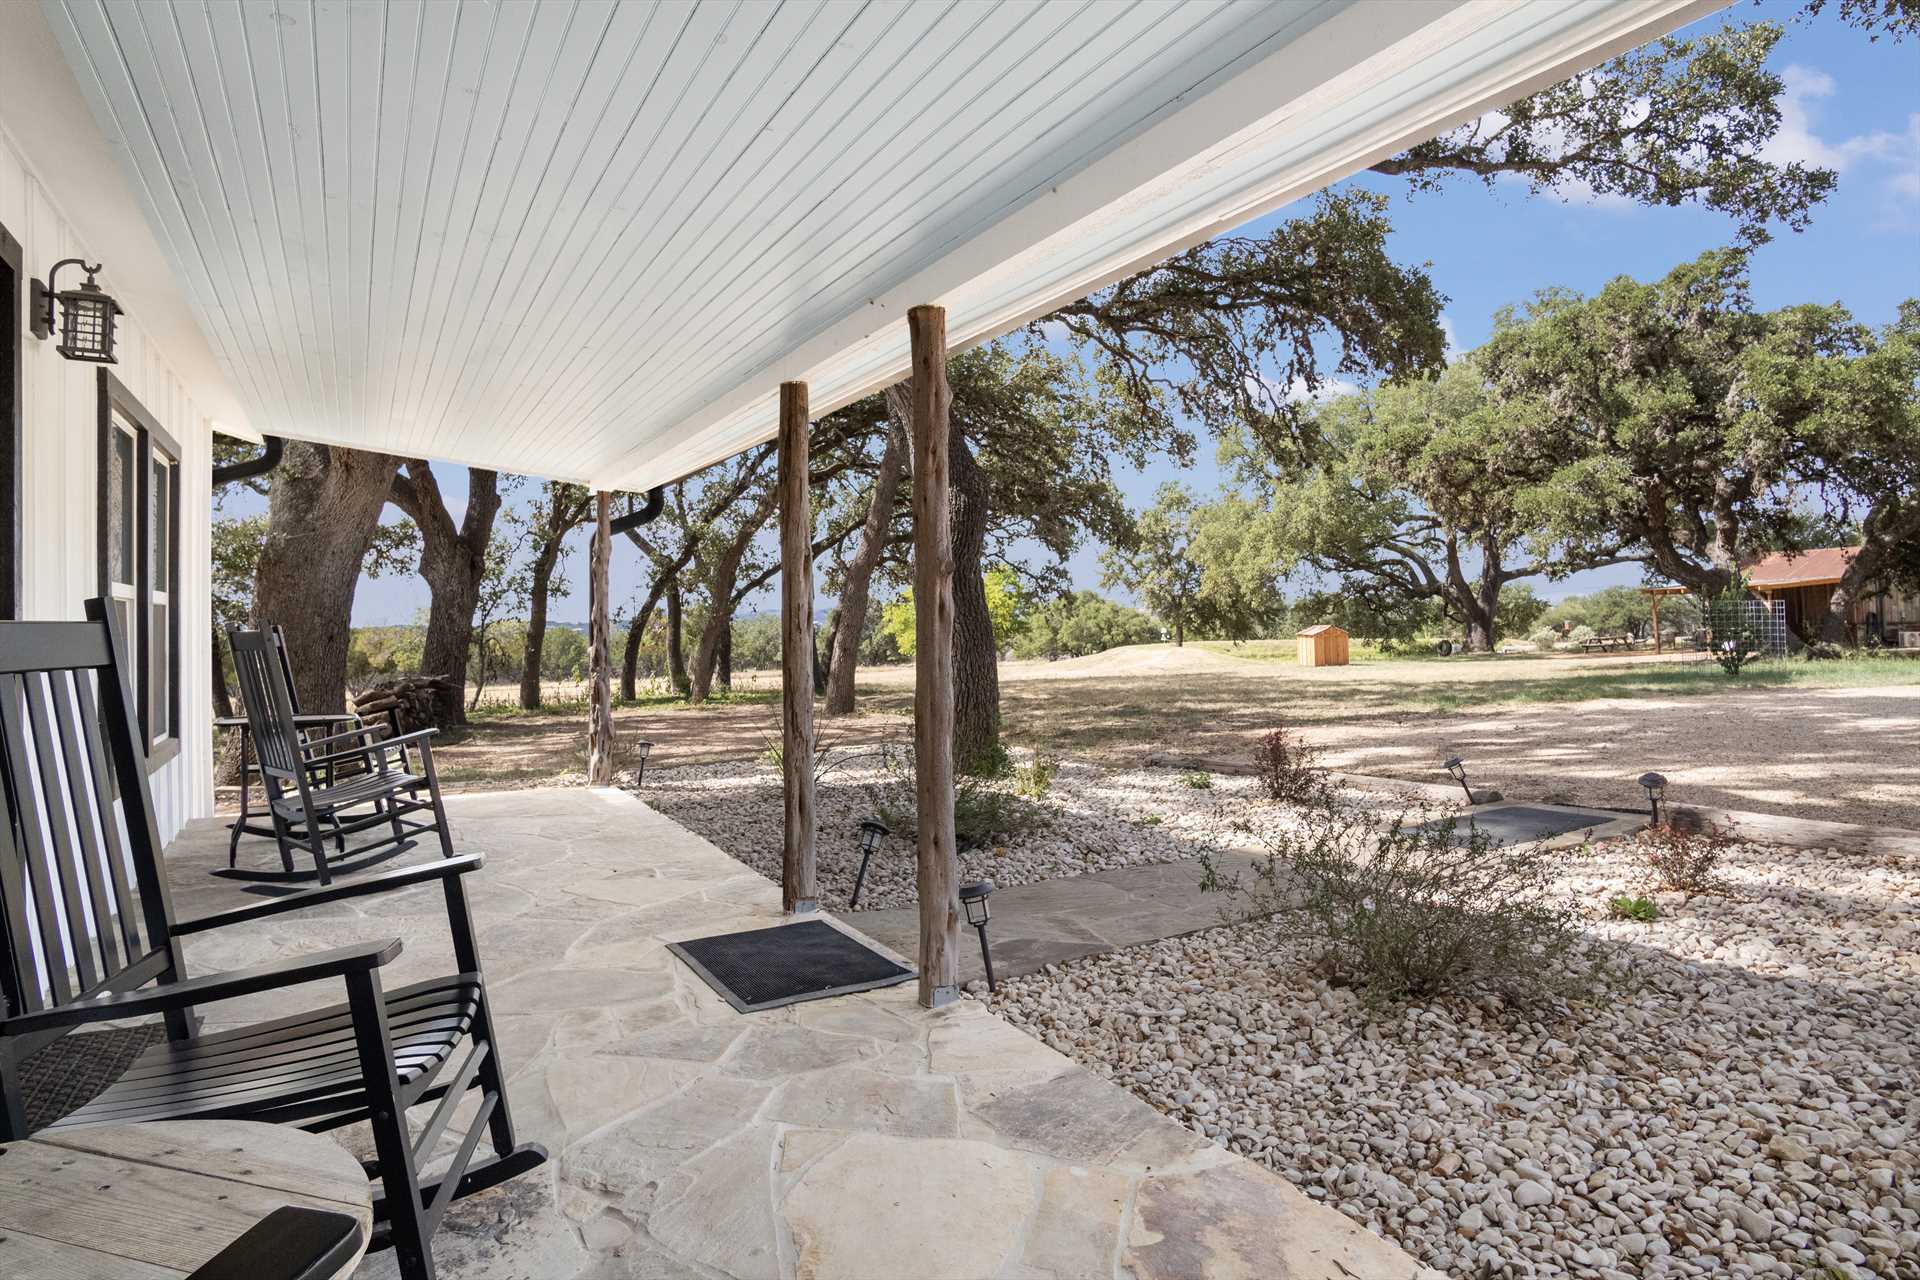                                                 Whether sipping your morning coffee or a nightcap, the Mirage's shaded porch is a relaxing spot to start or end your Hill Country day.